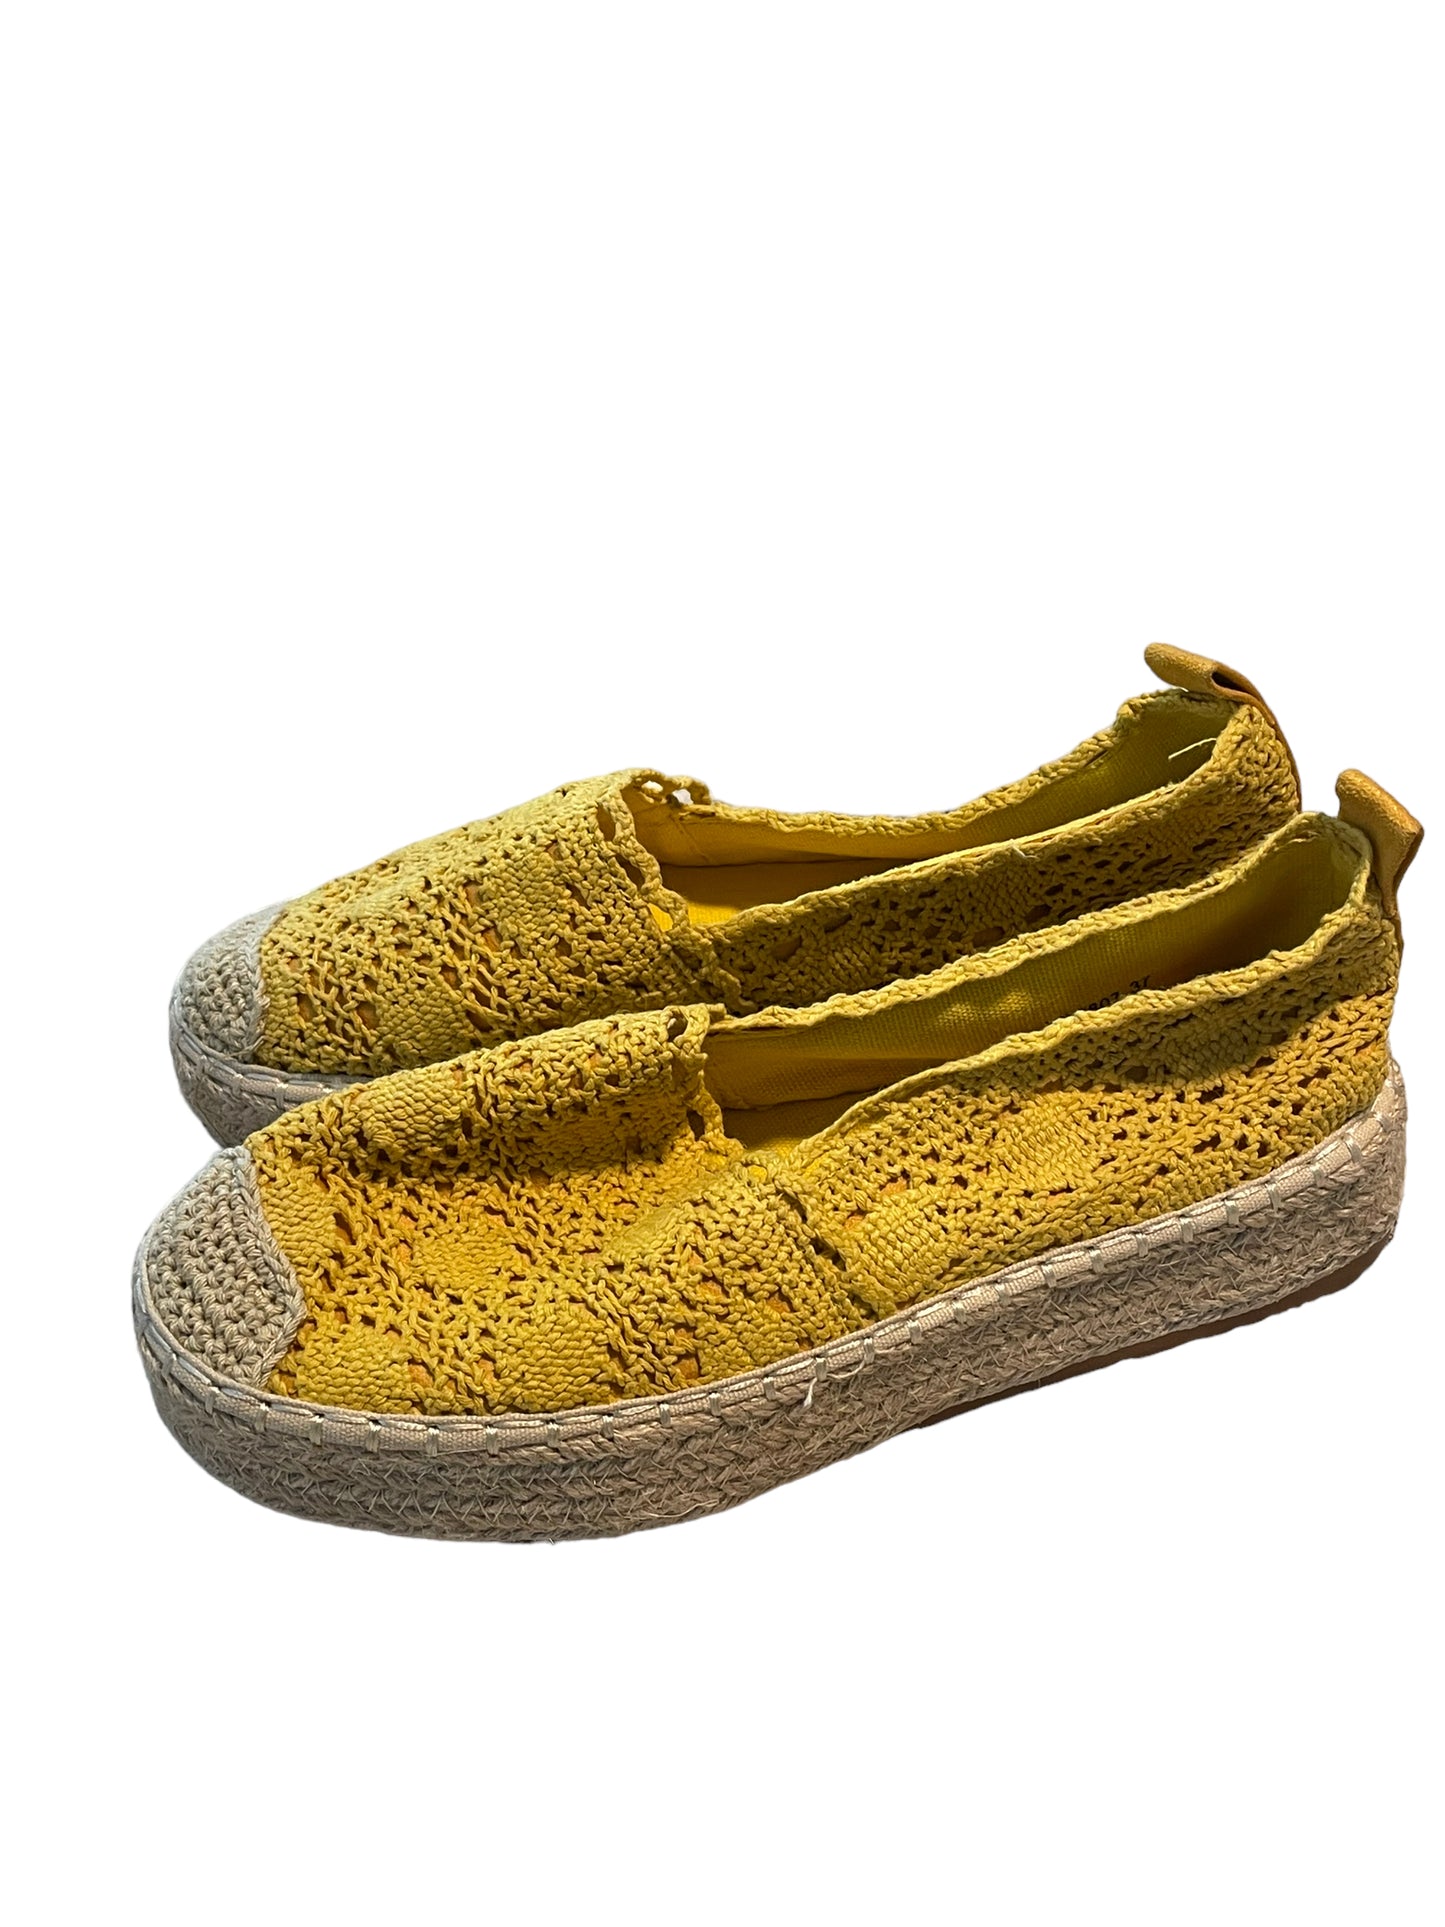 Glam & Co Yellow Crochet Shoes